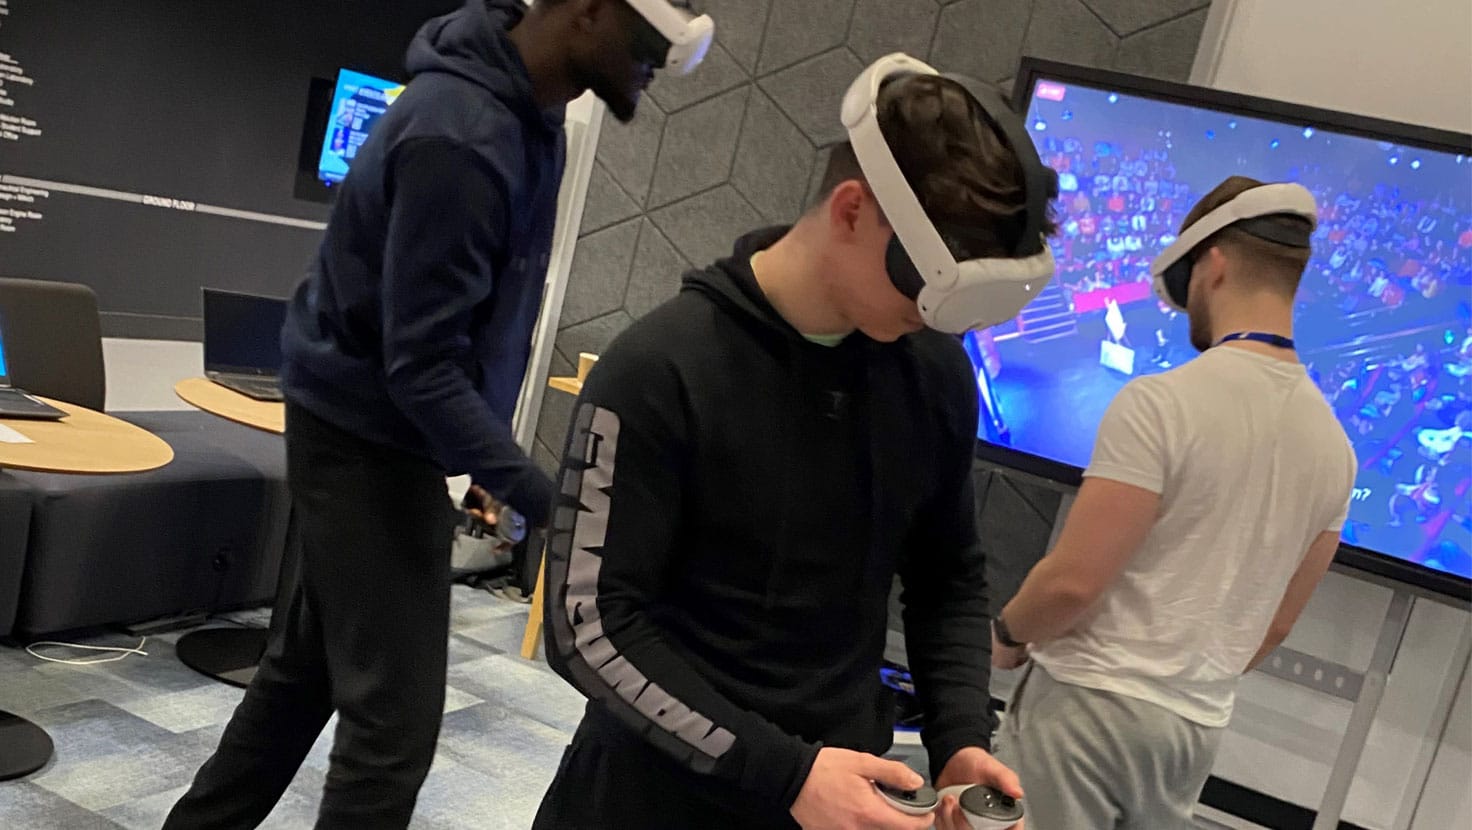 Students playing on VR headsets